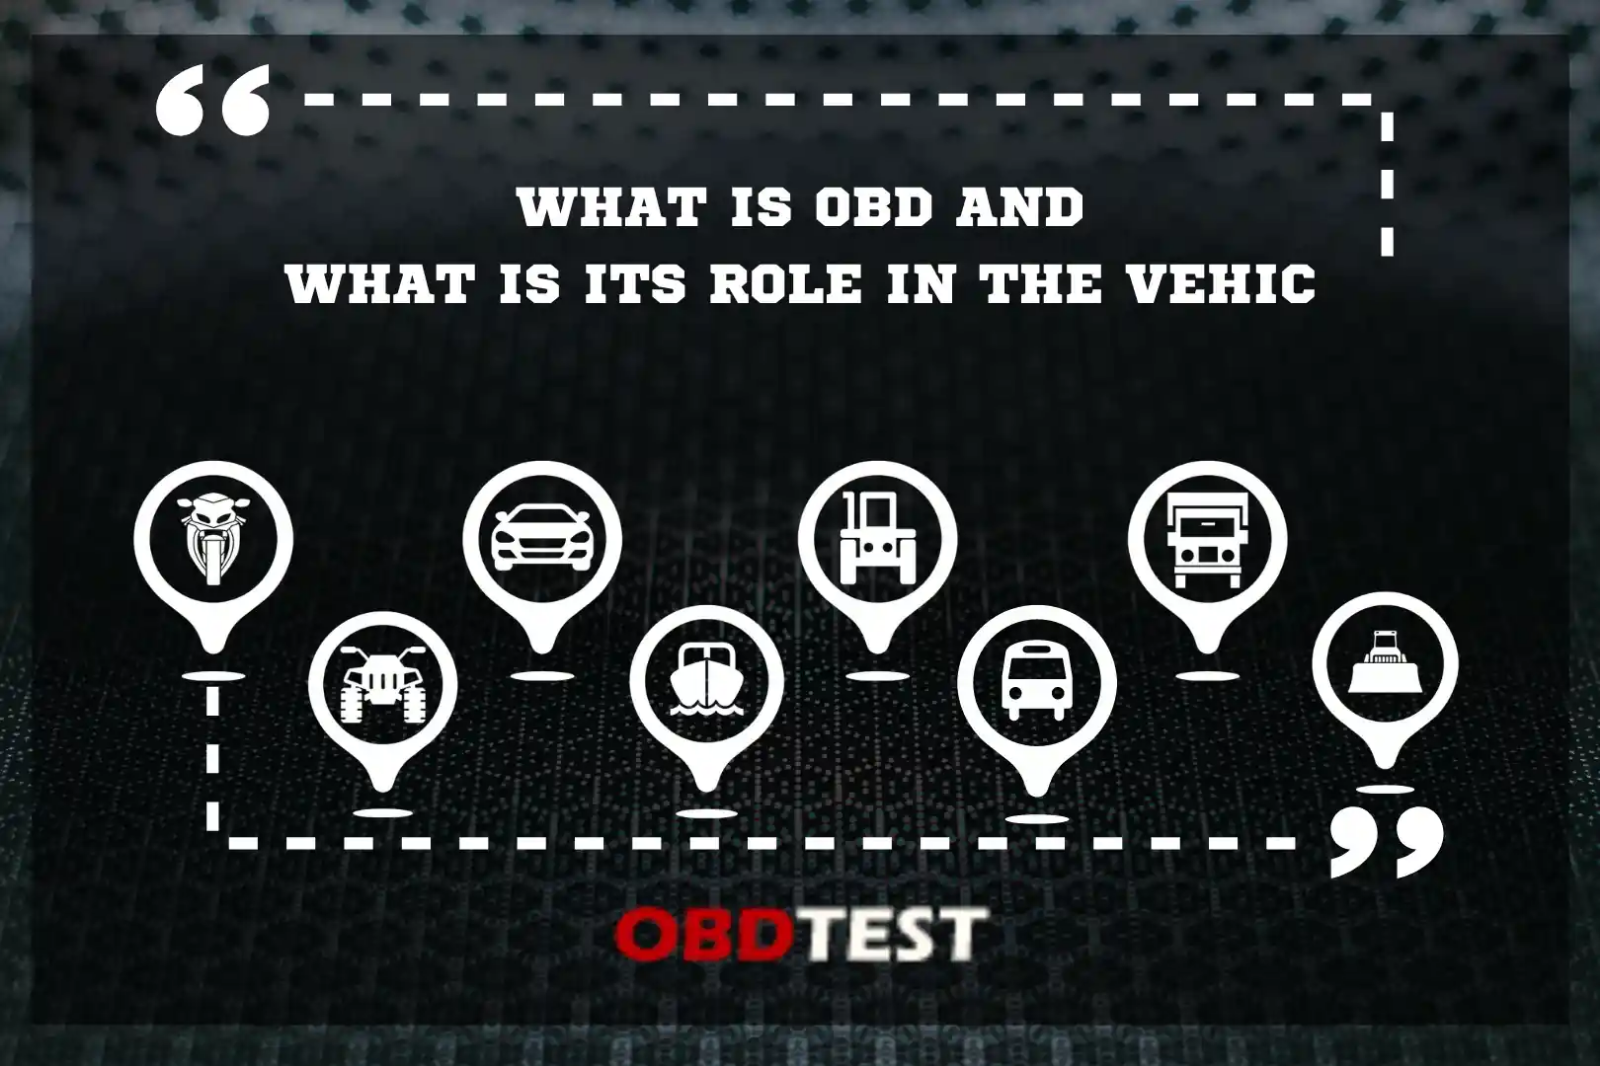 What is OBD and what is its role in the vehicle?